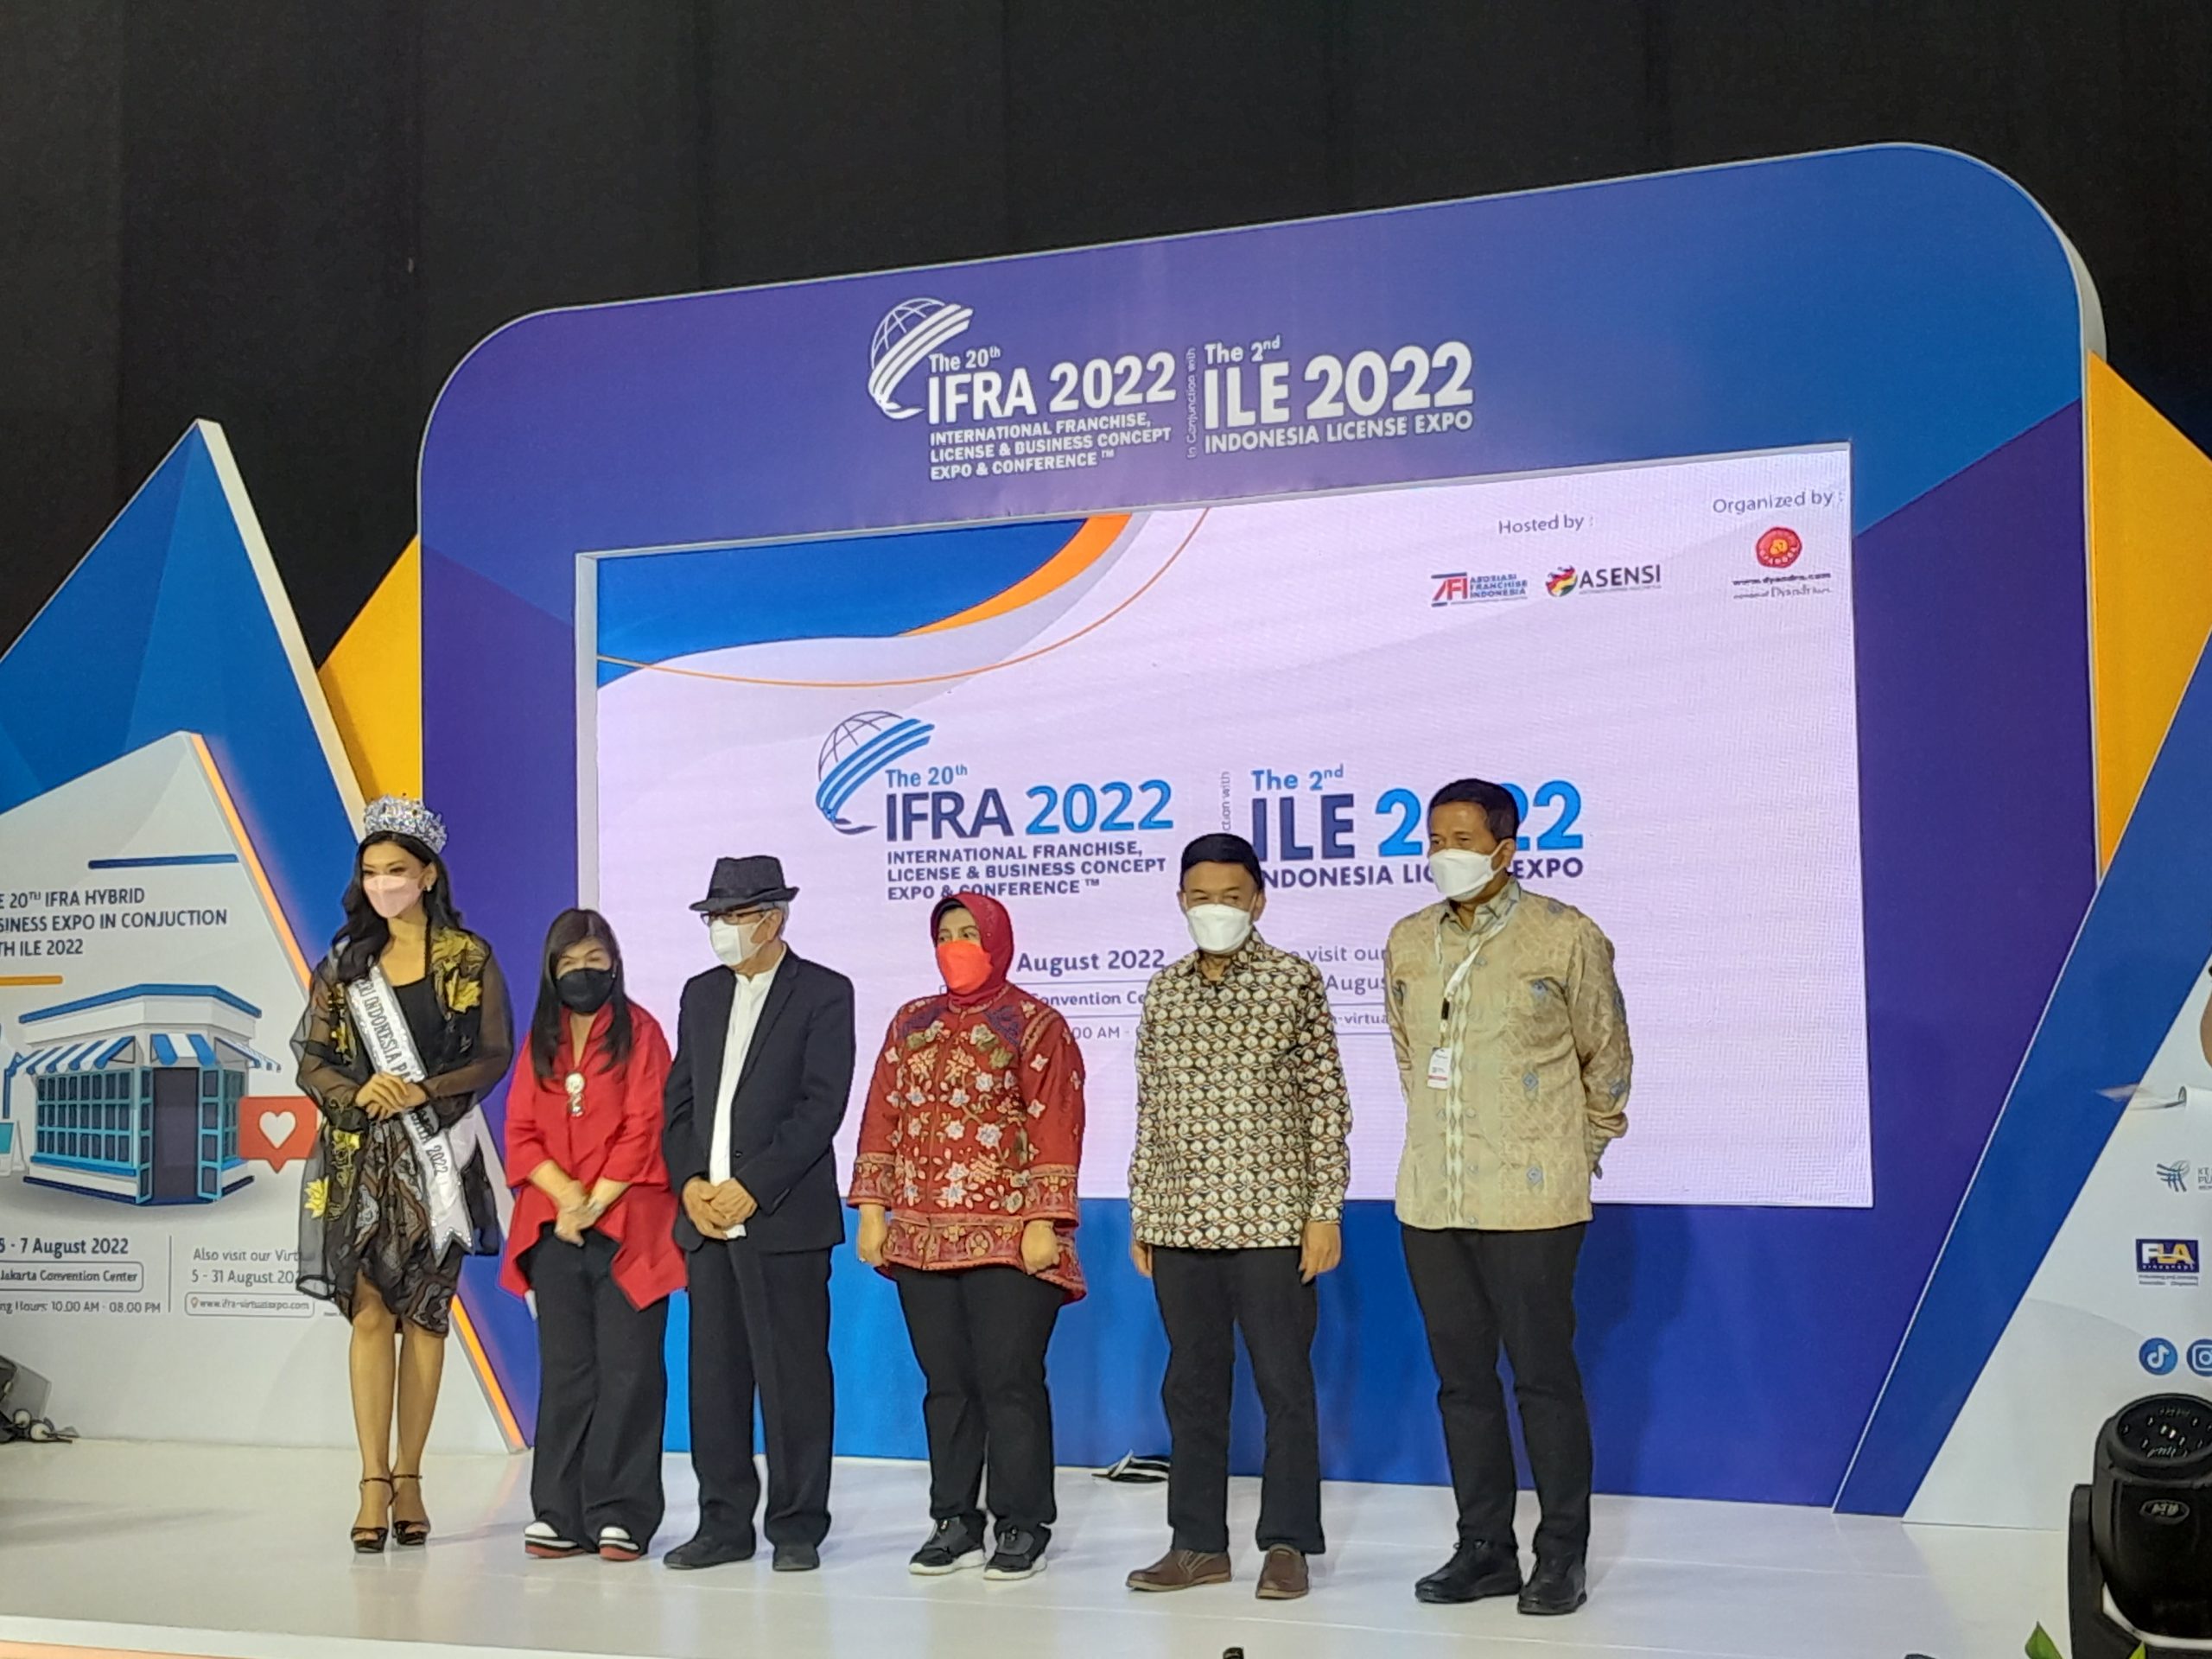 The 20th IFRA Hybrid Business Expo in conjunction with the 2nd ILE 2022